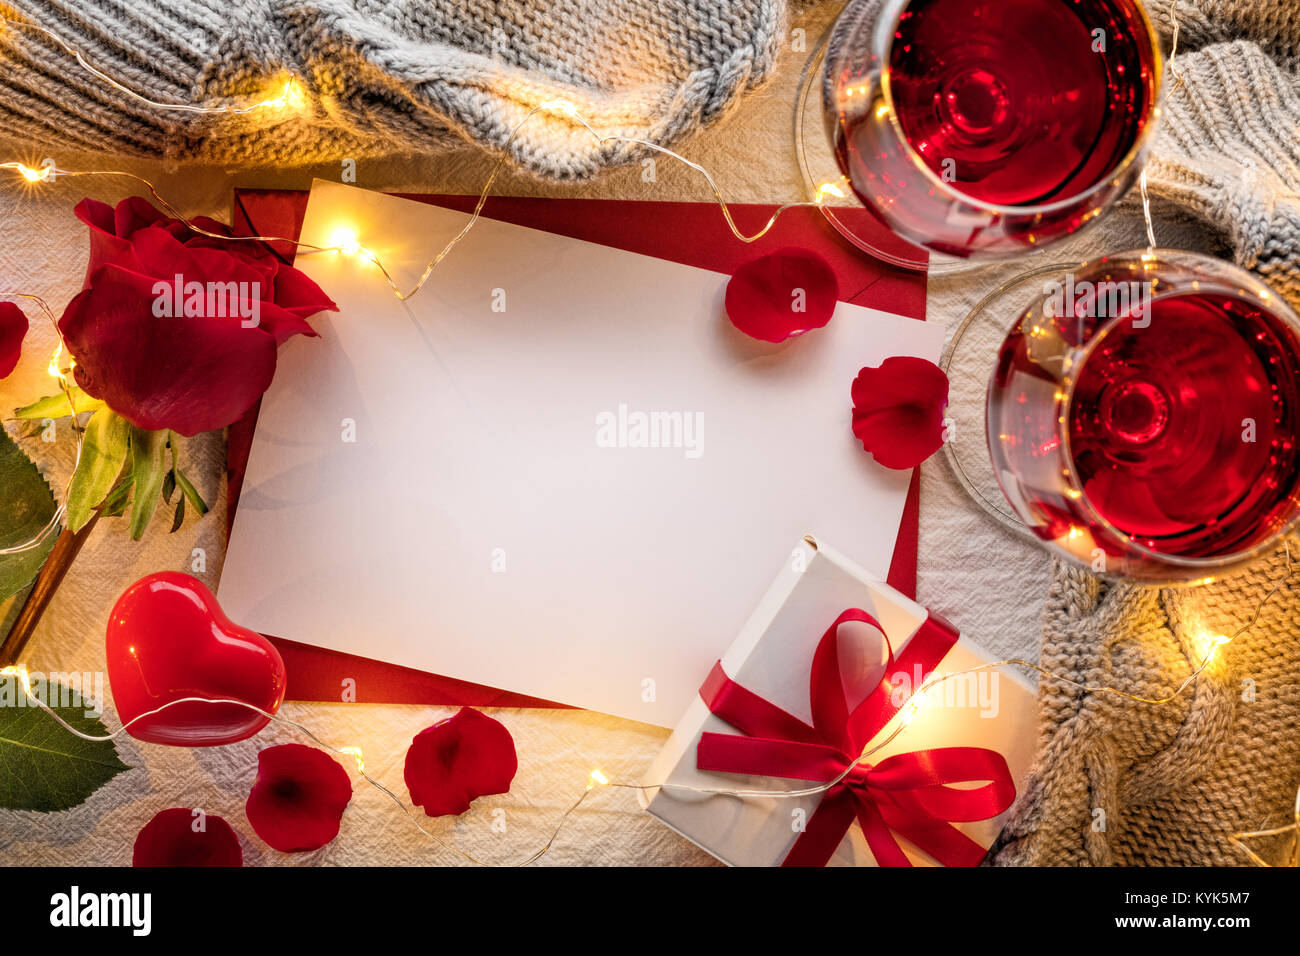 Valentines day celebration with red wine,rose and card Stock Photo